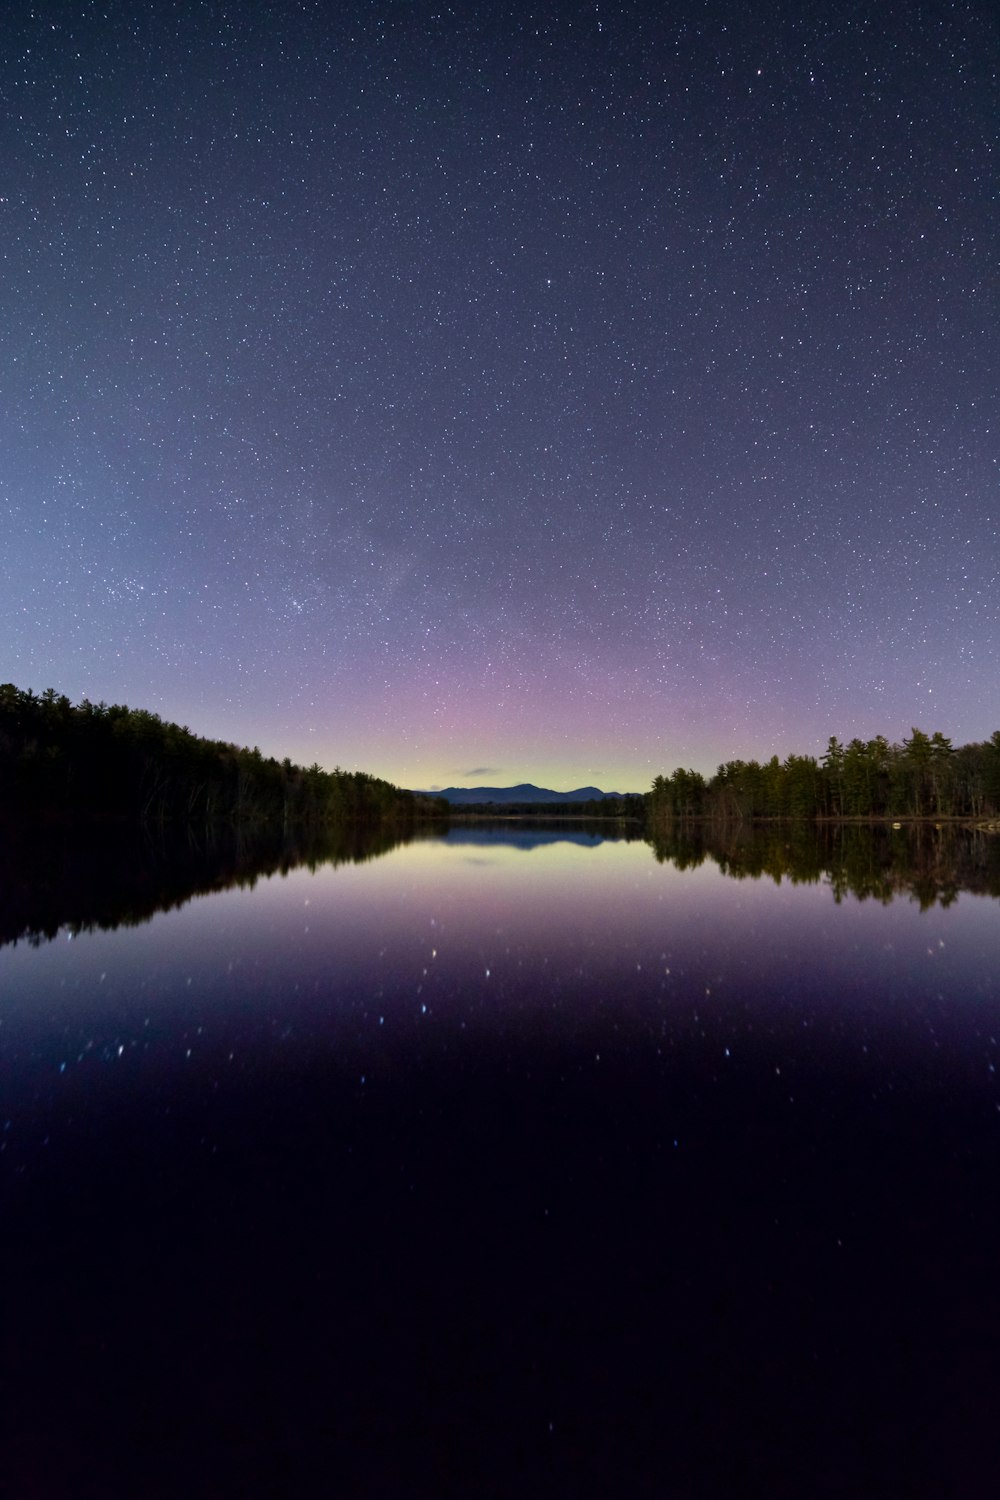 reflection photography of star and sky under calm body of water